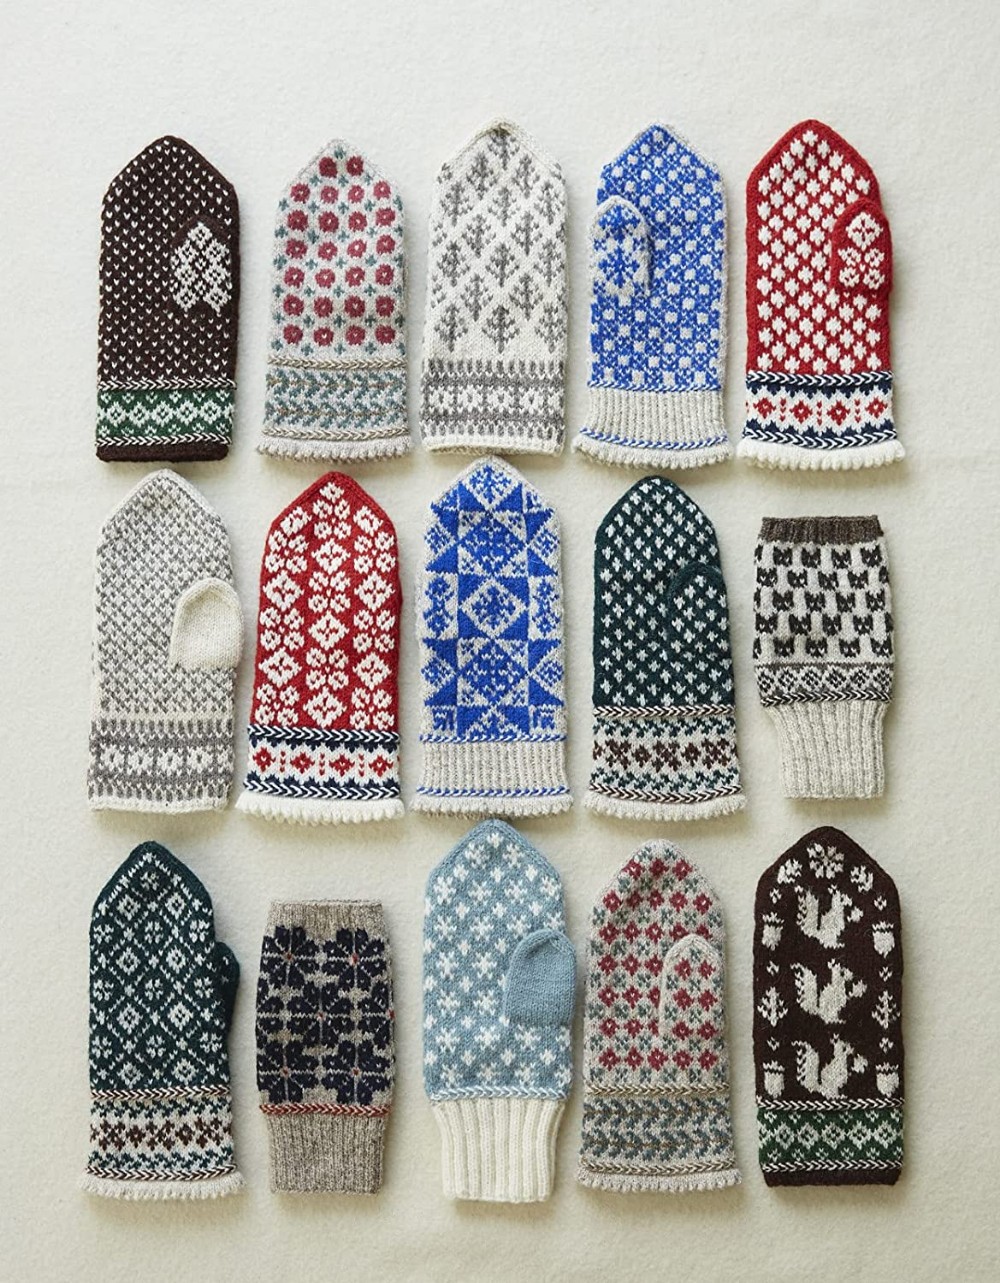 Hand-knitted mittens and komono from mittens shop 